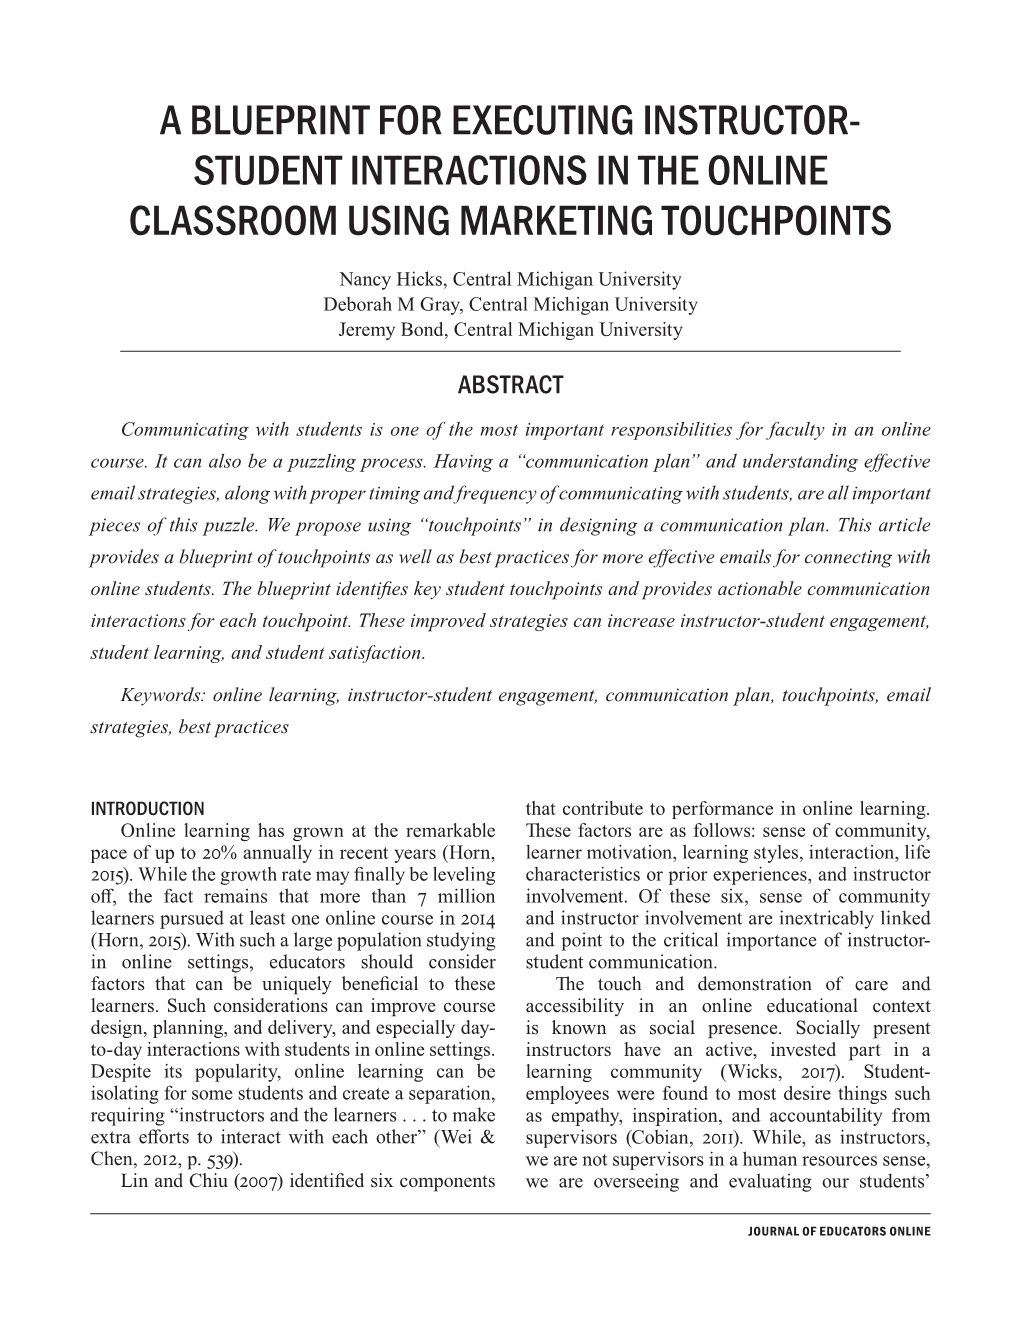 A Blueprint for Executing Instructor- Student Interactions in the Online Classroom Using Marketing Touchpoints